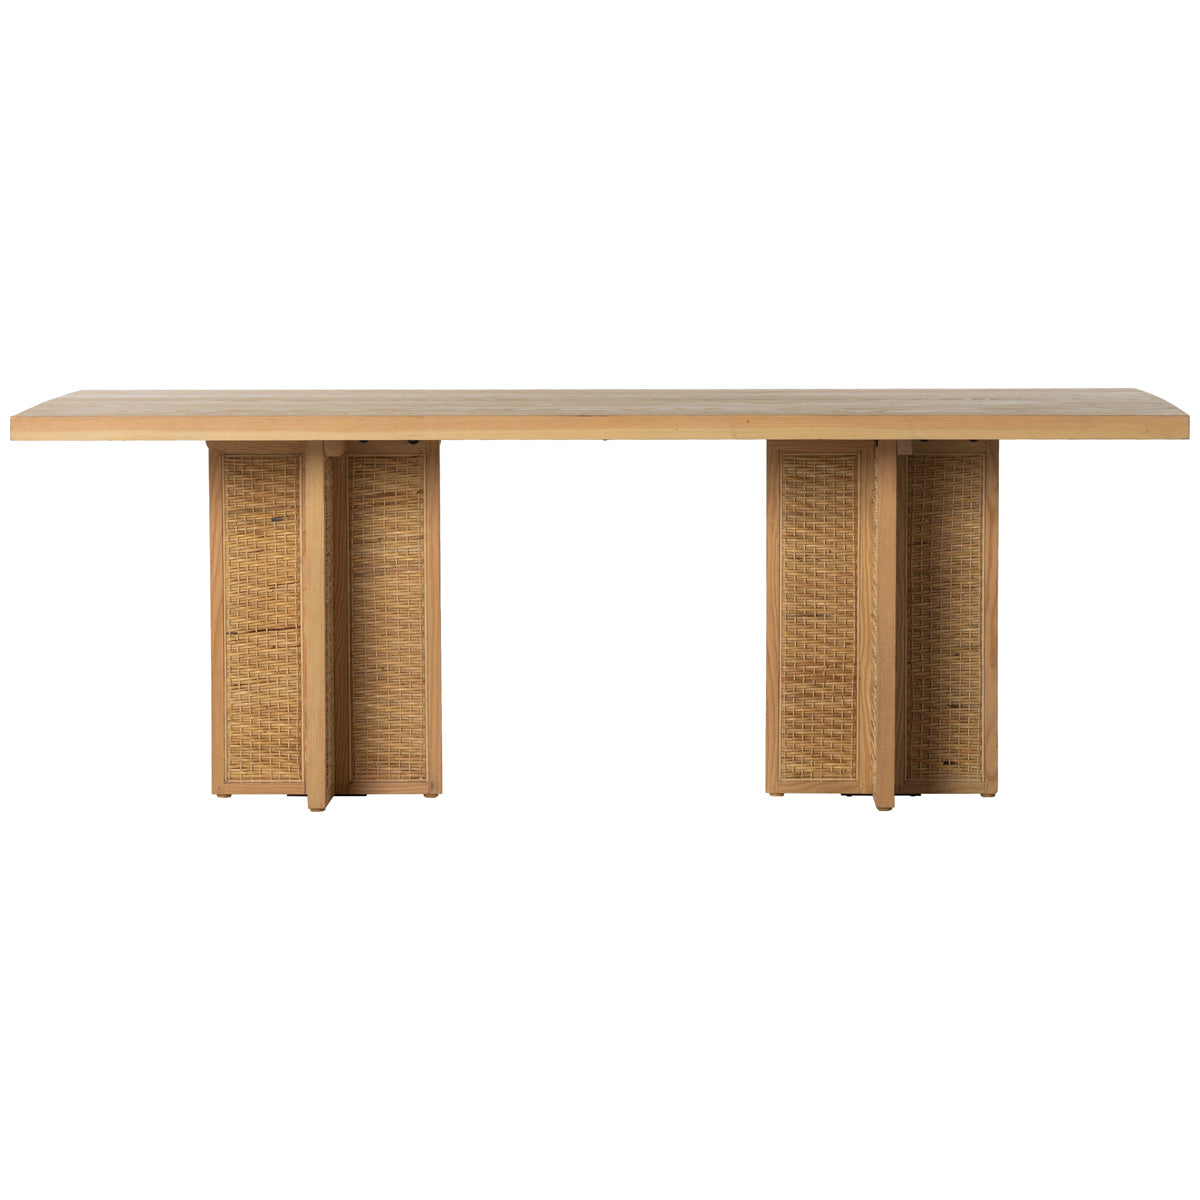 Four Hands Leighton Levon Dining Table - Natural Woven